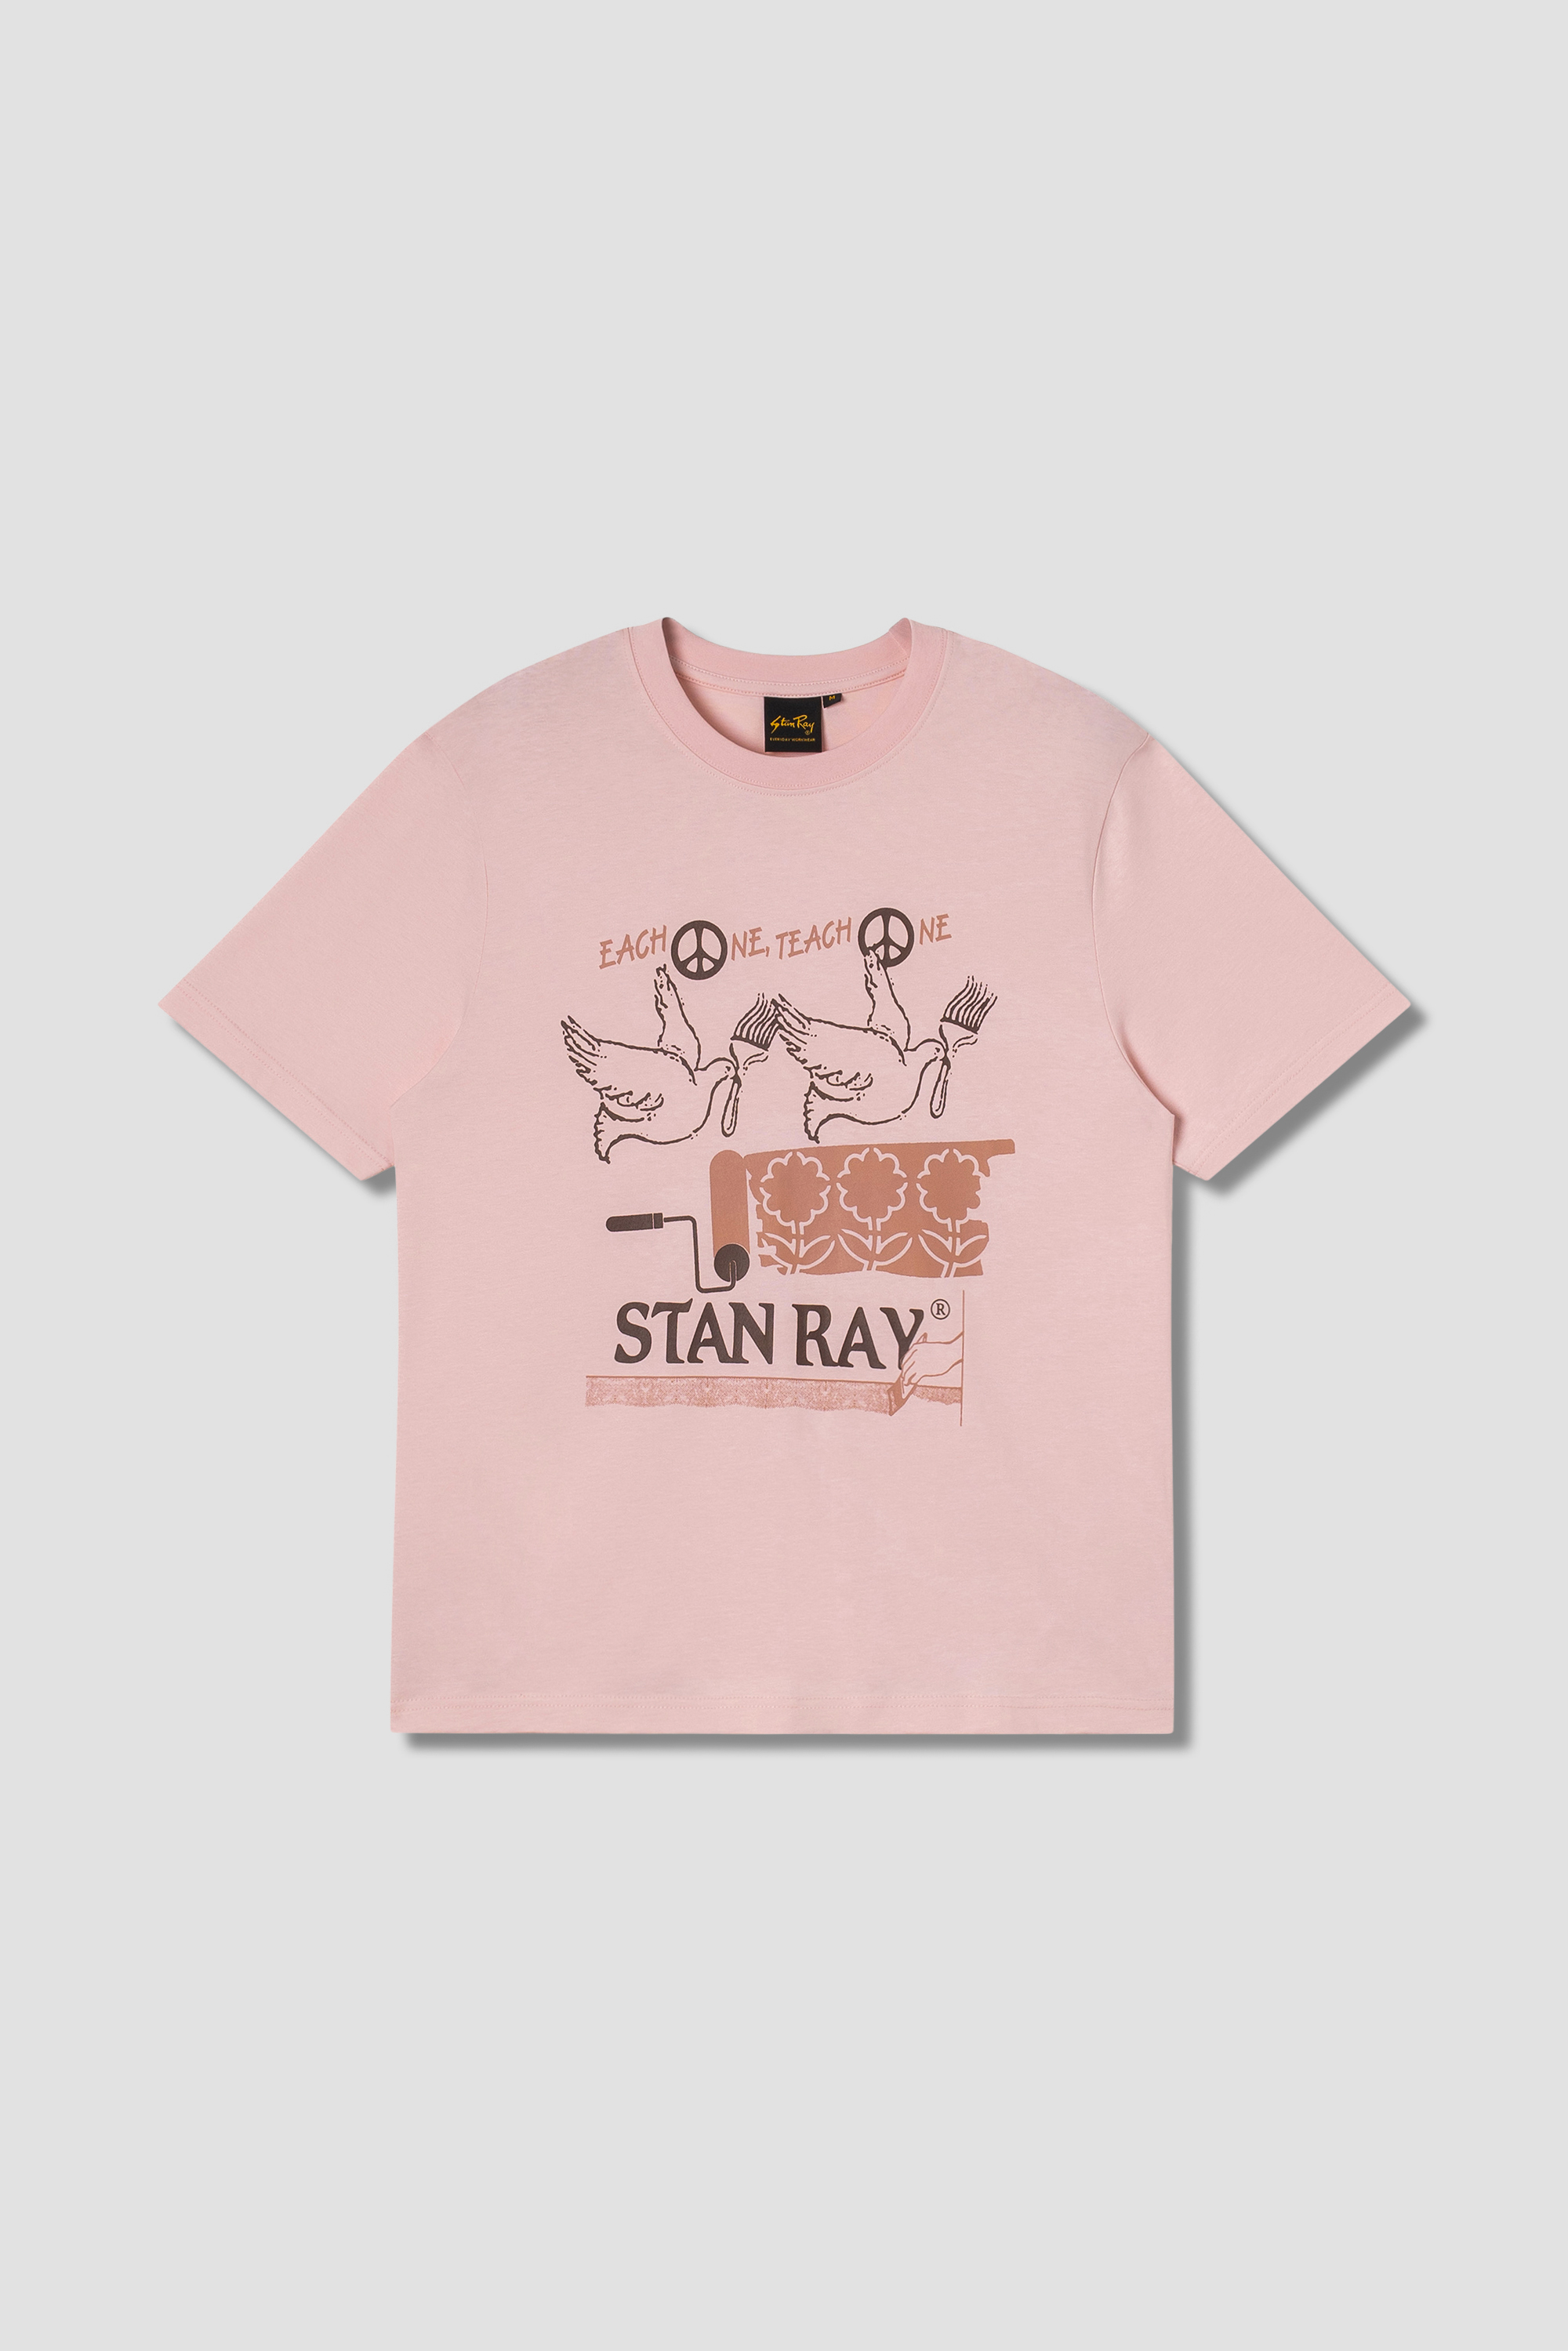 Stan Ray  Each One T-Shirt - Pink